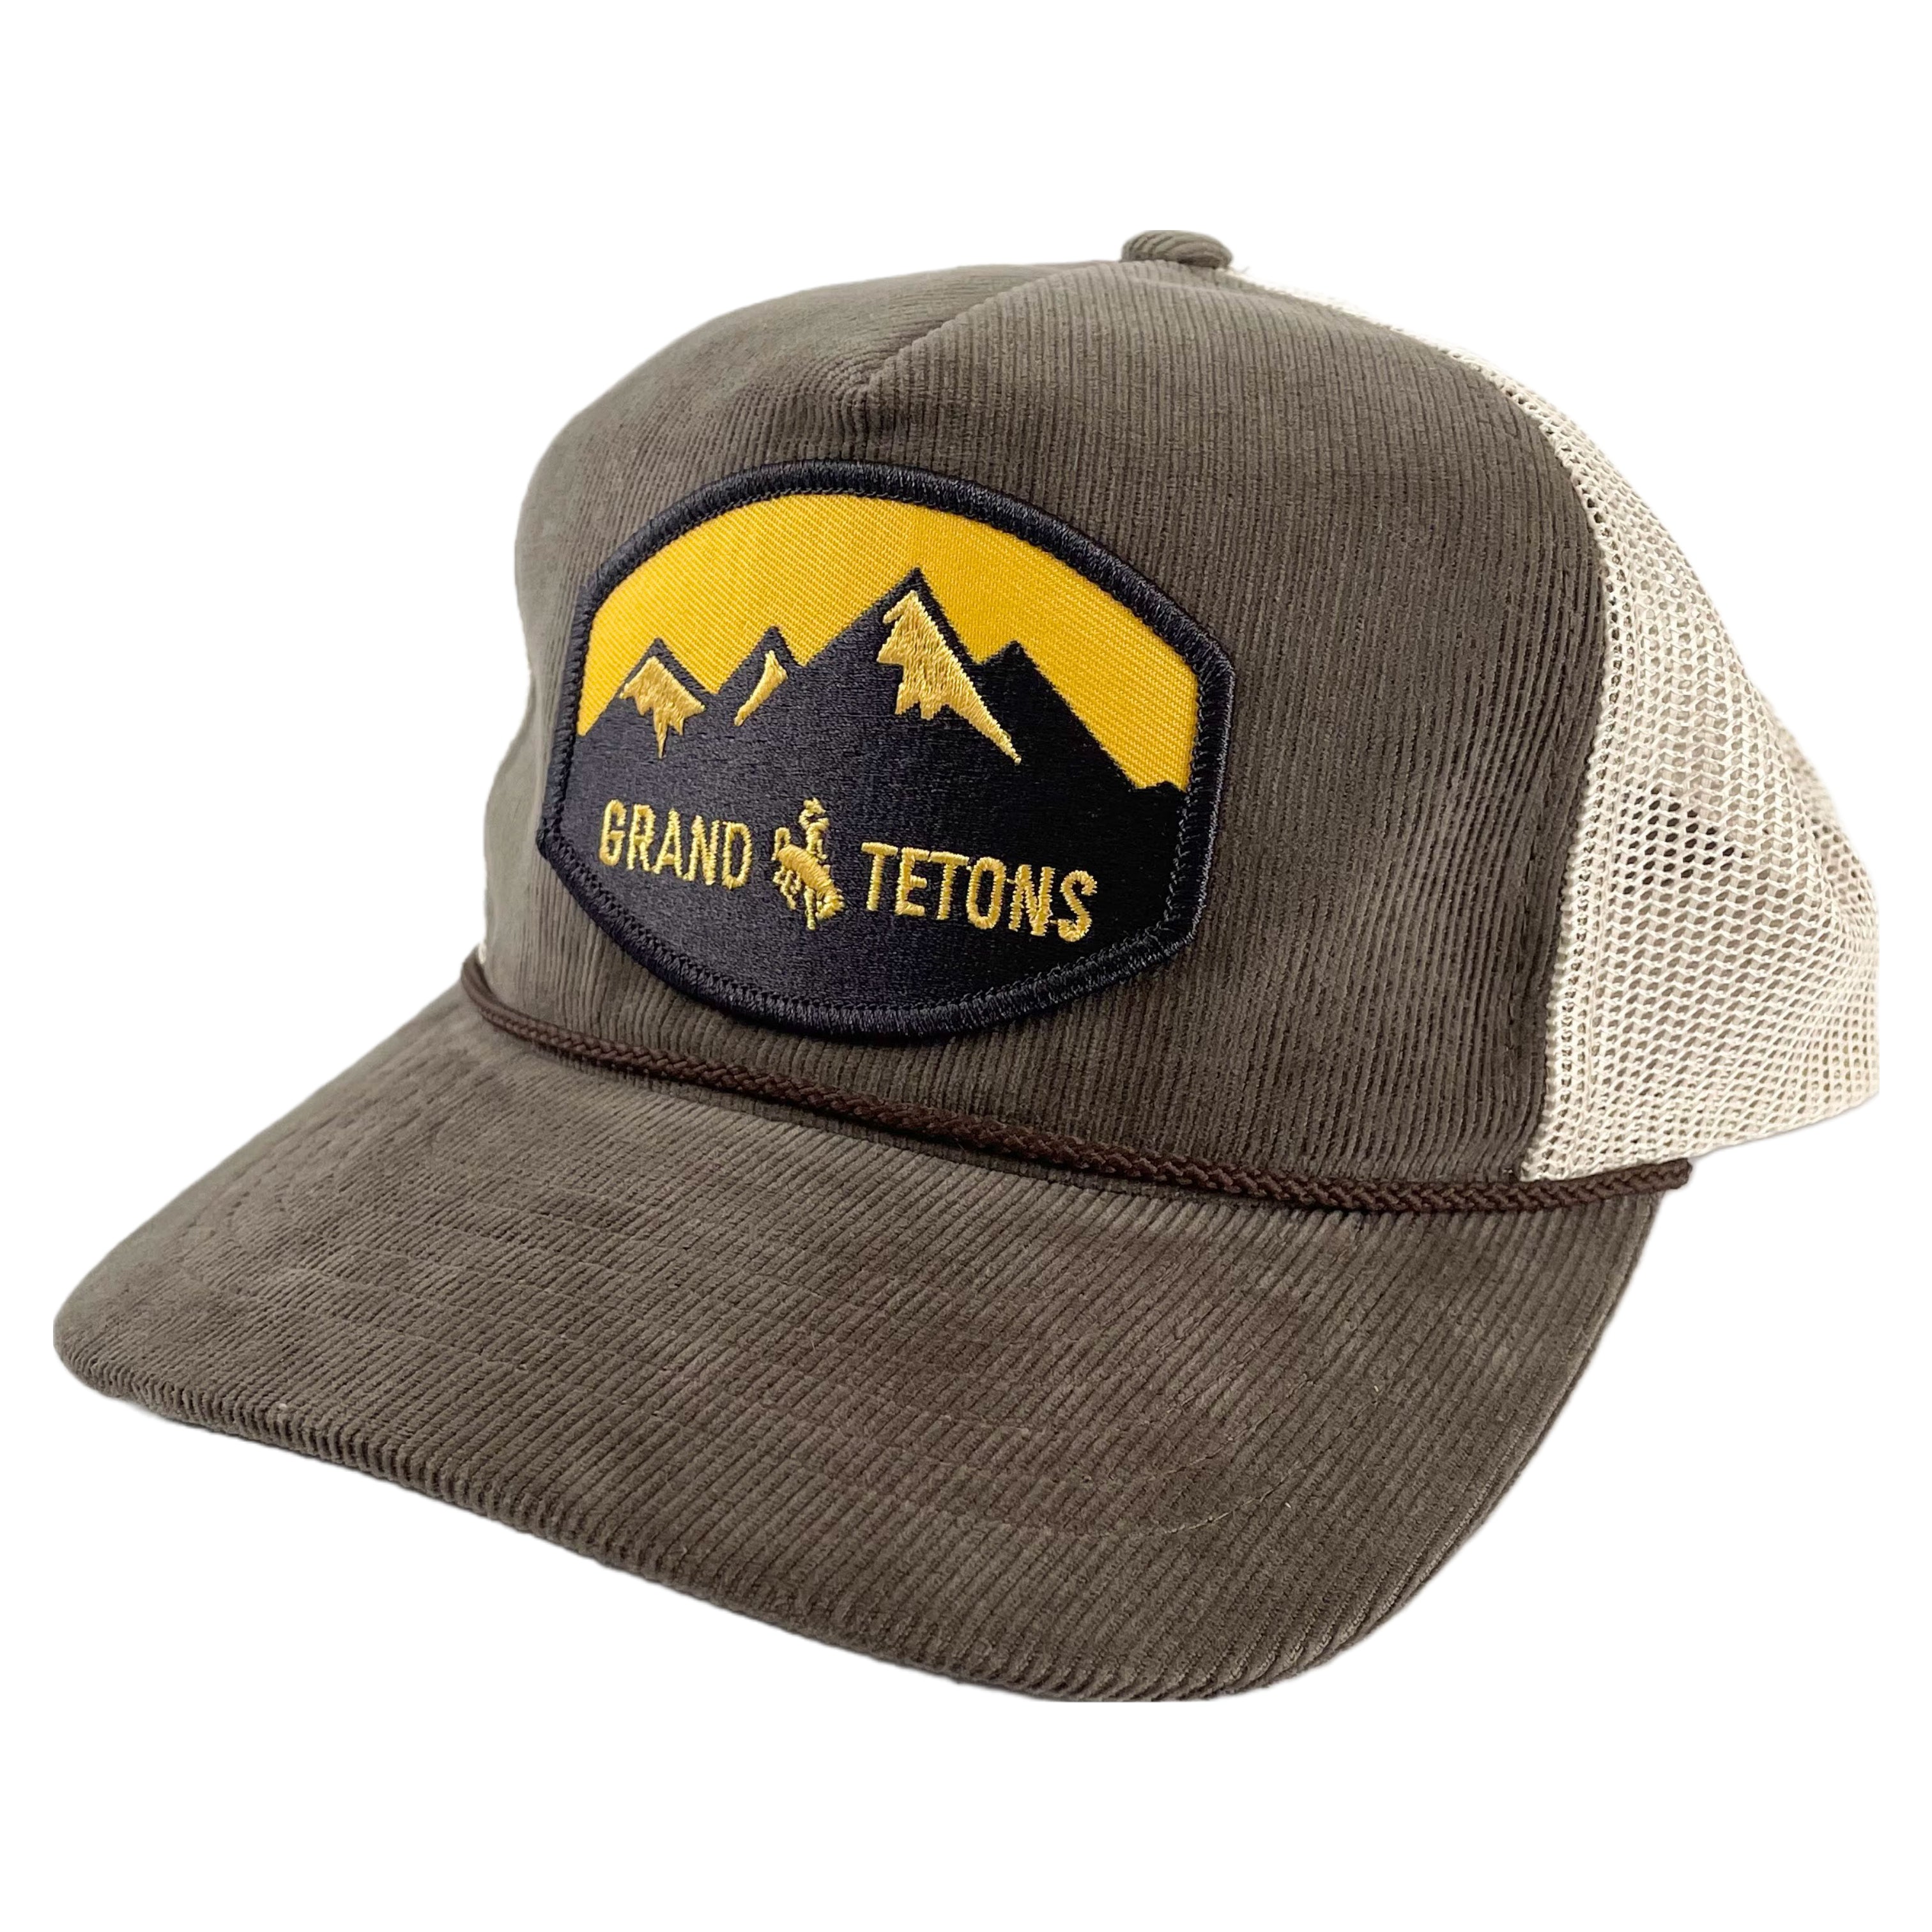 Trucker Hat Leather Patch: Outdoorsy Bison - Wyo Dirt Customs Heather Grey/Black